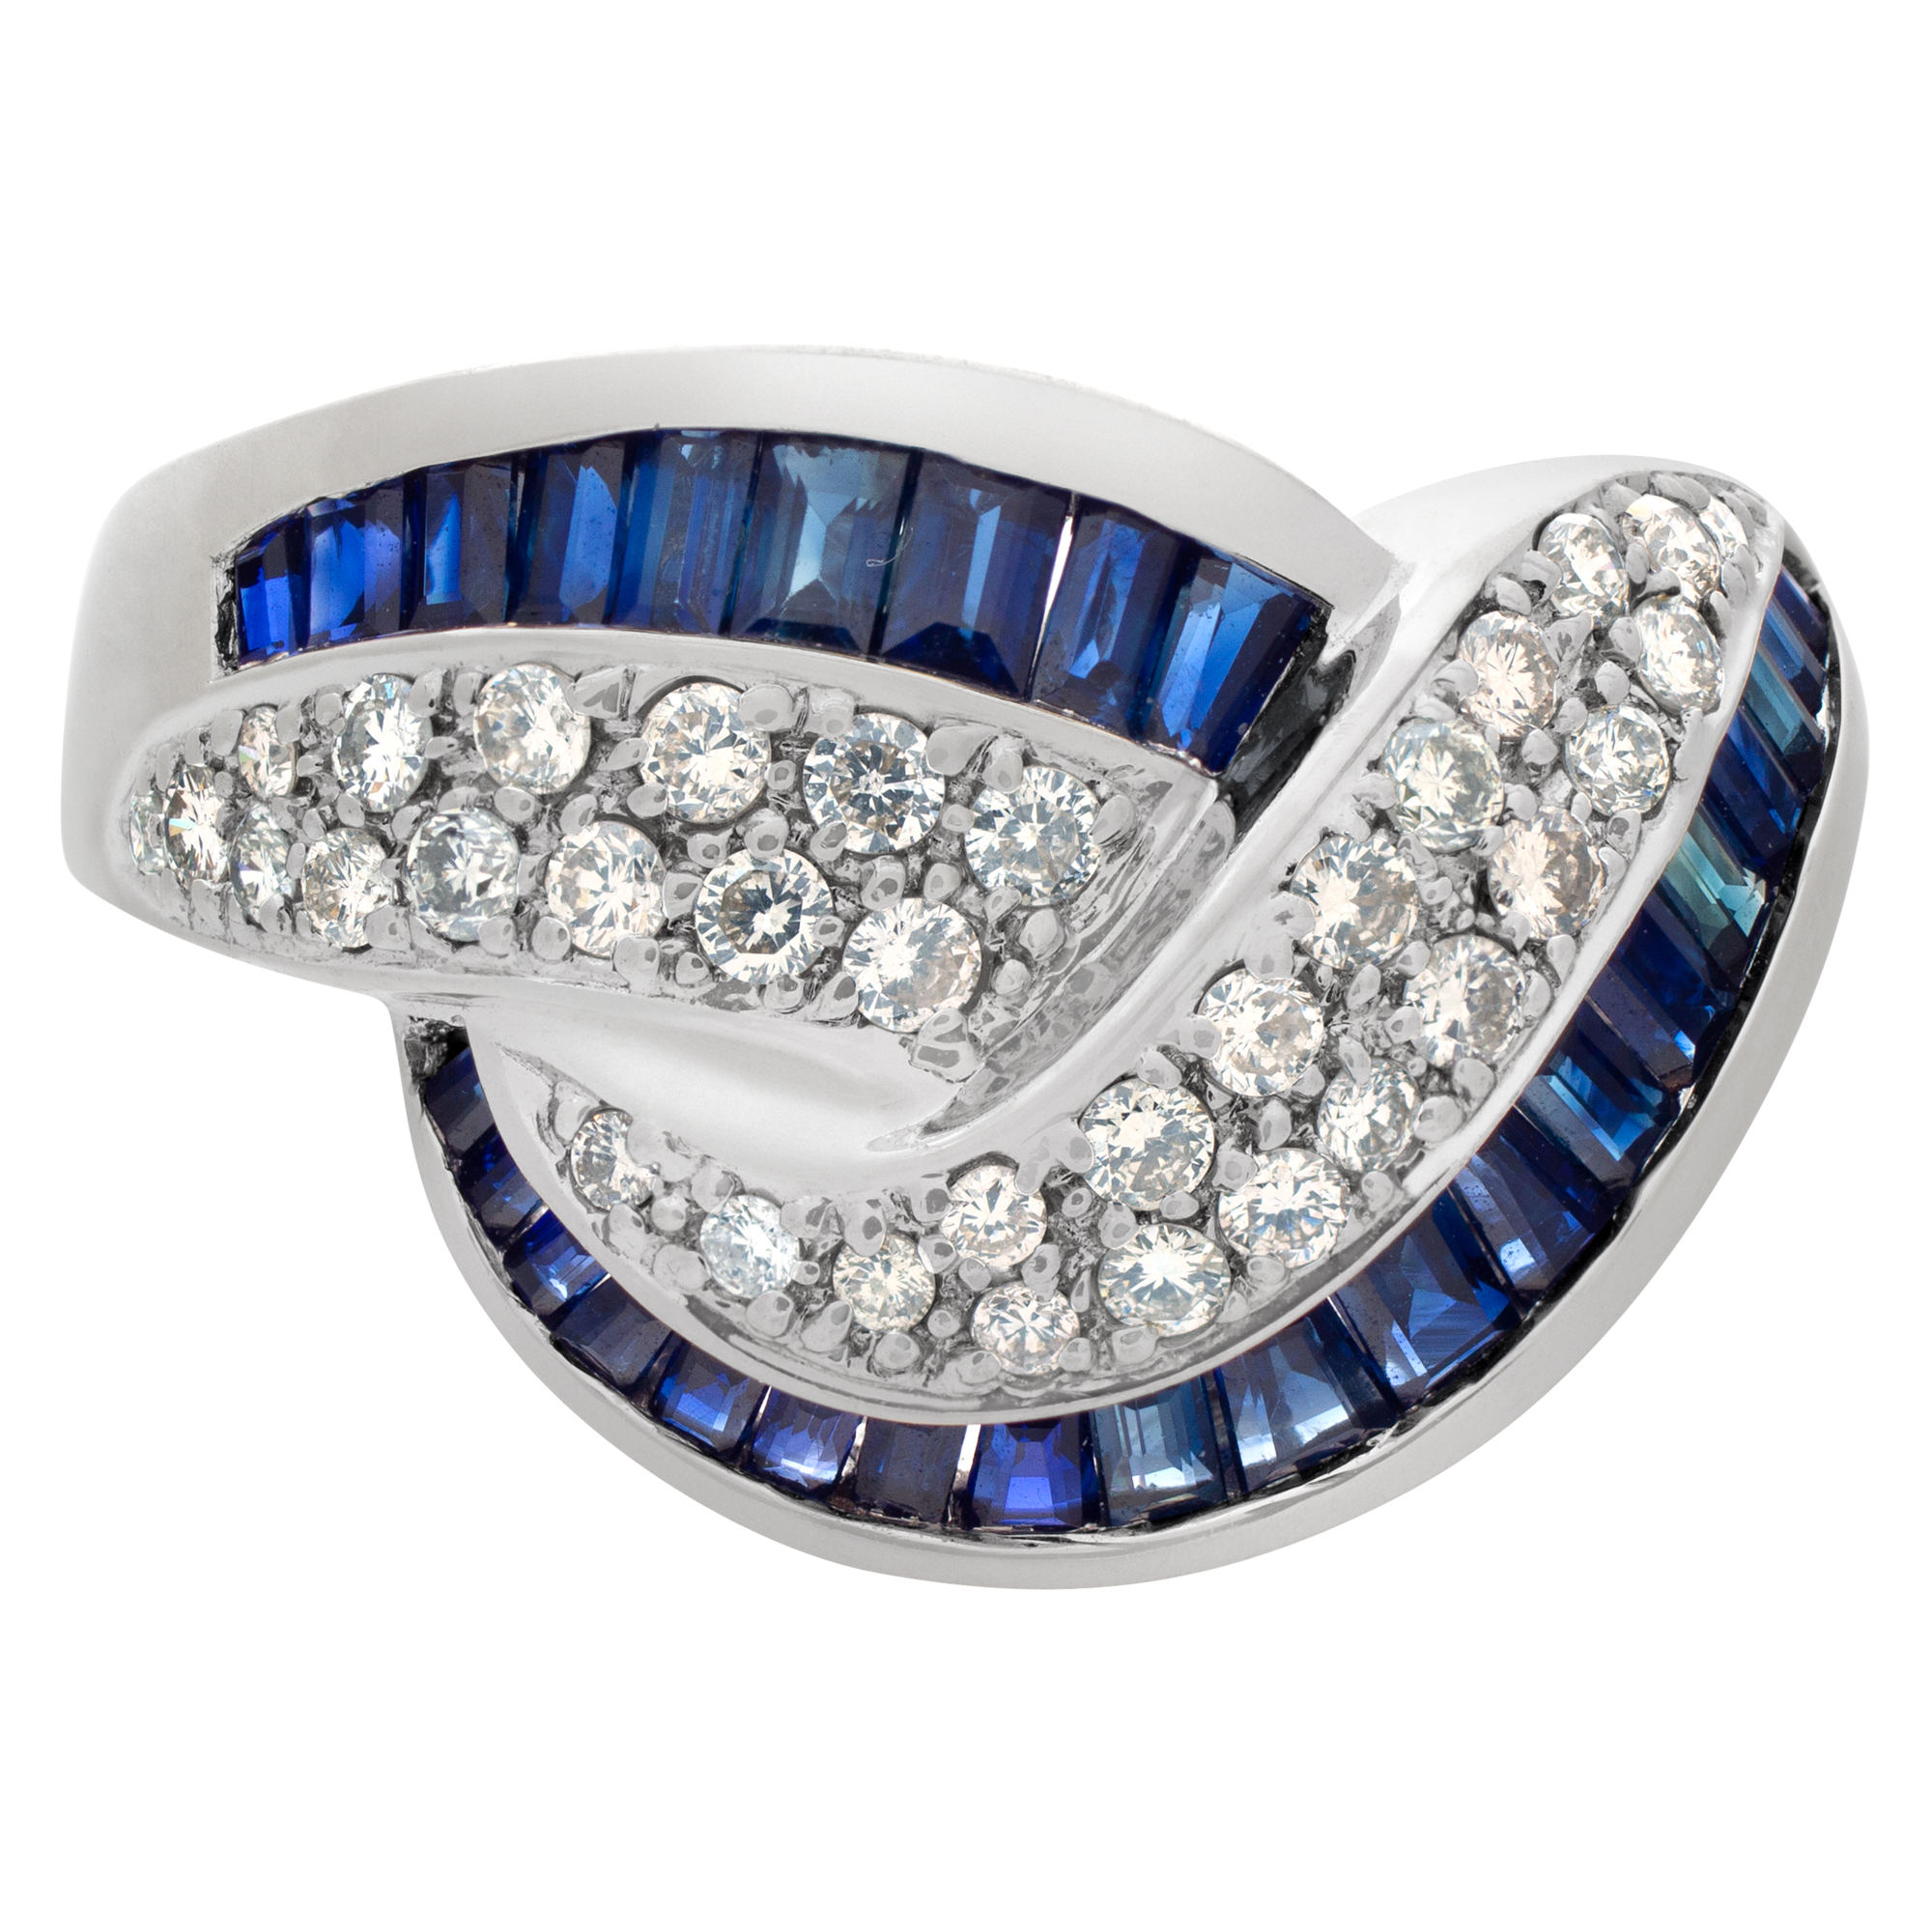 Criss-Cross sapphire & diamond ring in 14K white gold. Approx 1 carat tapered emerald cut sapphire and 0.75 carat full cut round diamond. image 2